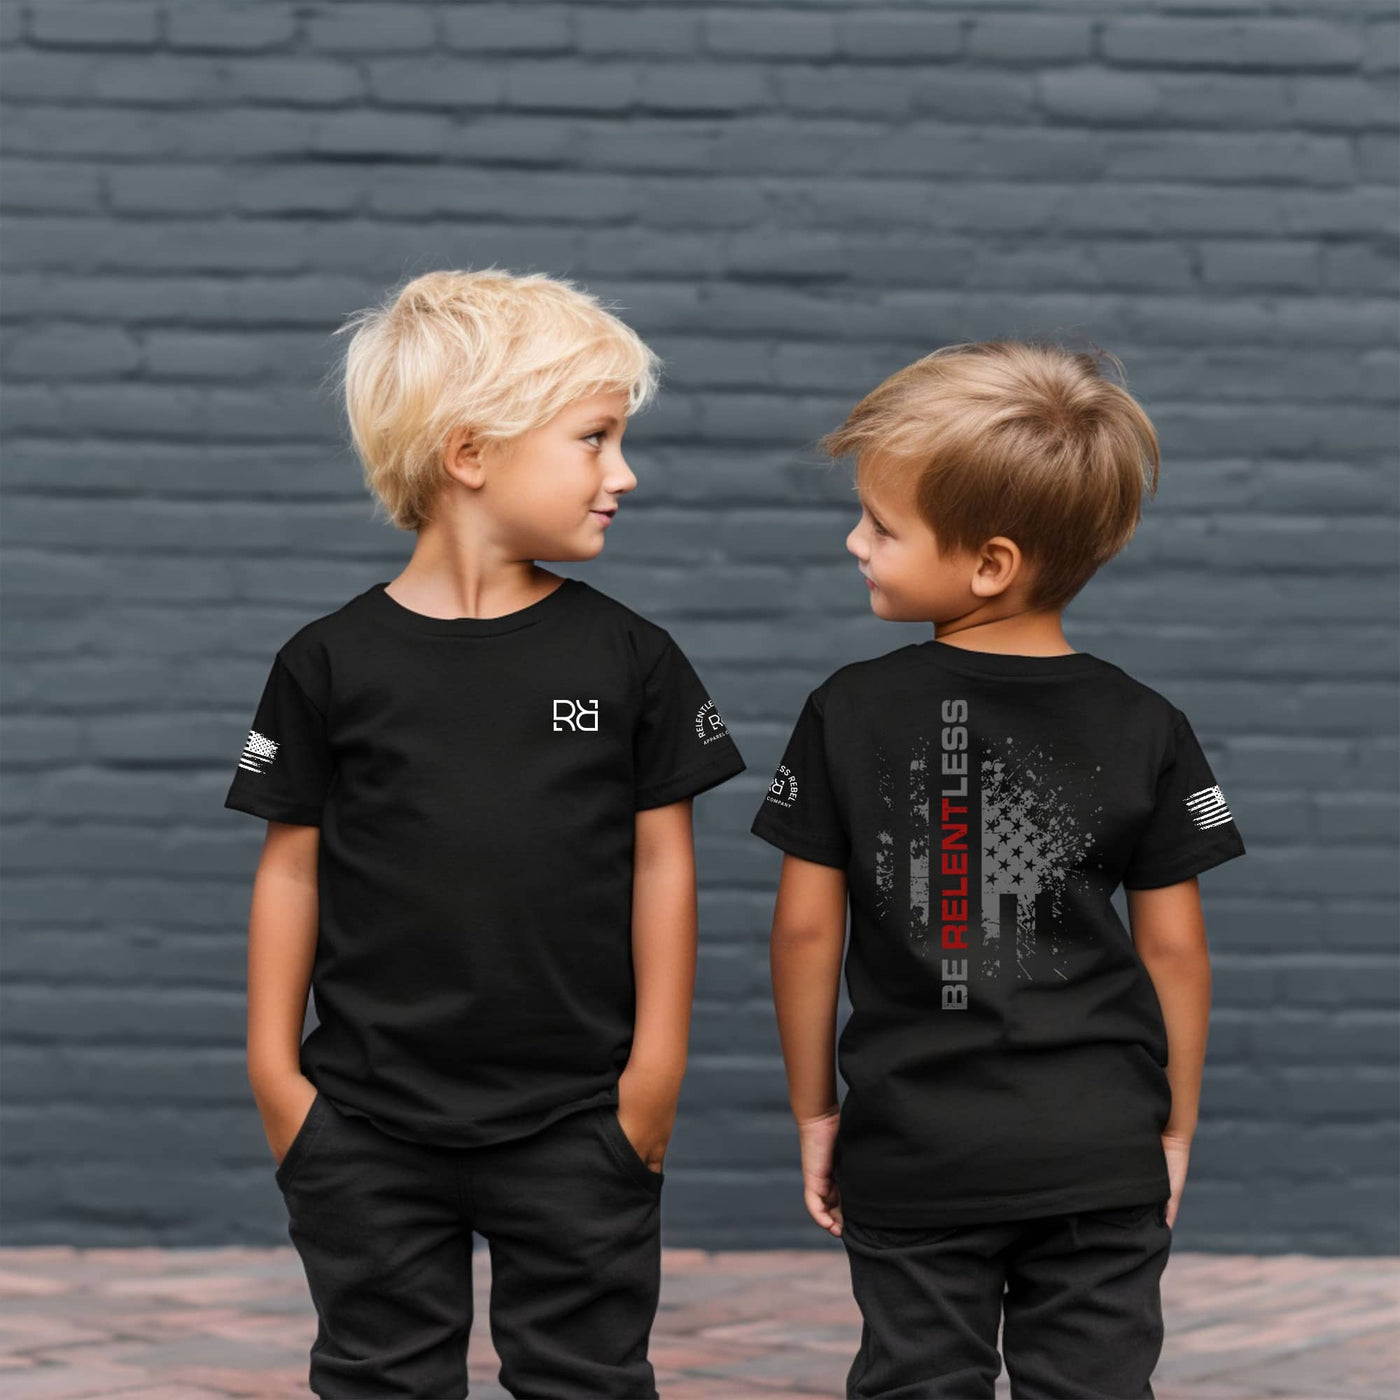 Boys wearing Solid Black Youth Be Relentless Back Design Tee